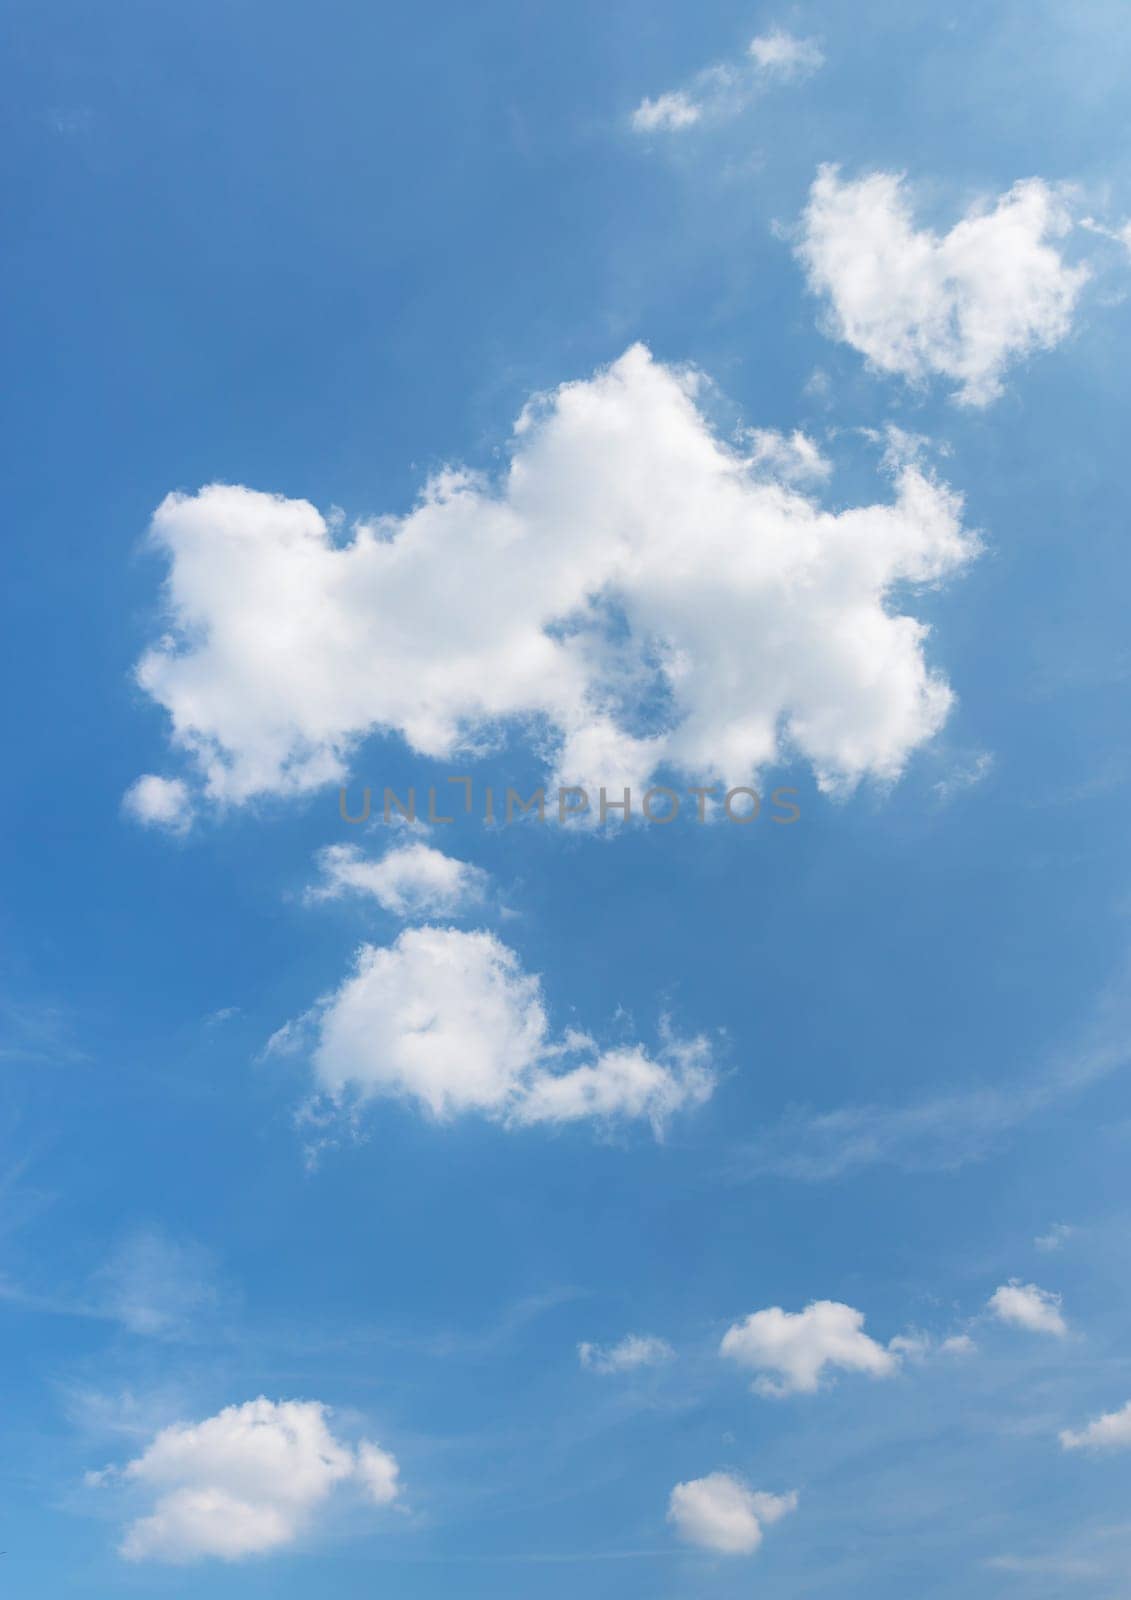 Sky with white clouds. Ideal for background.